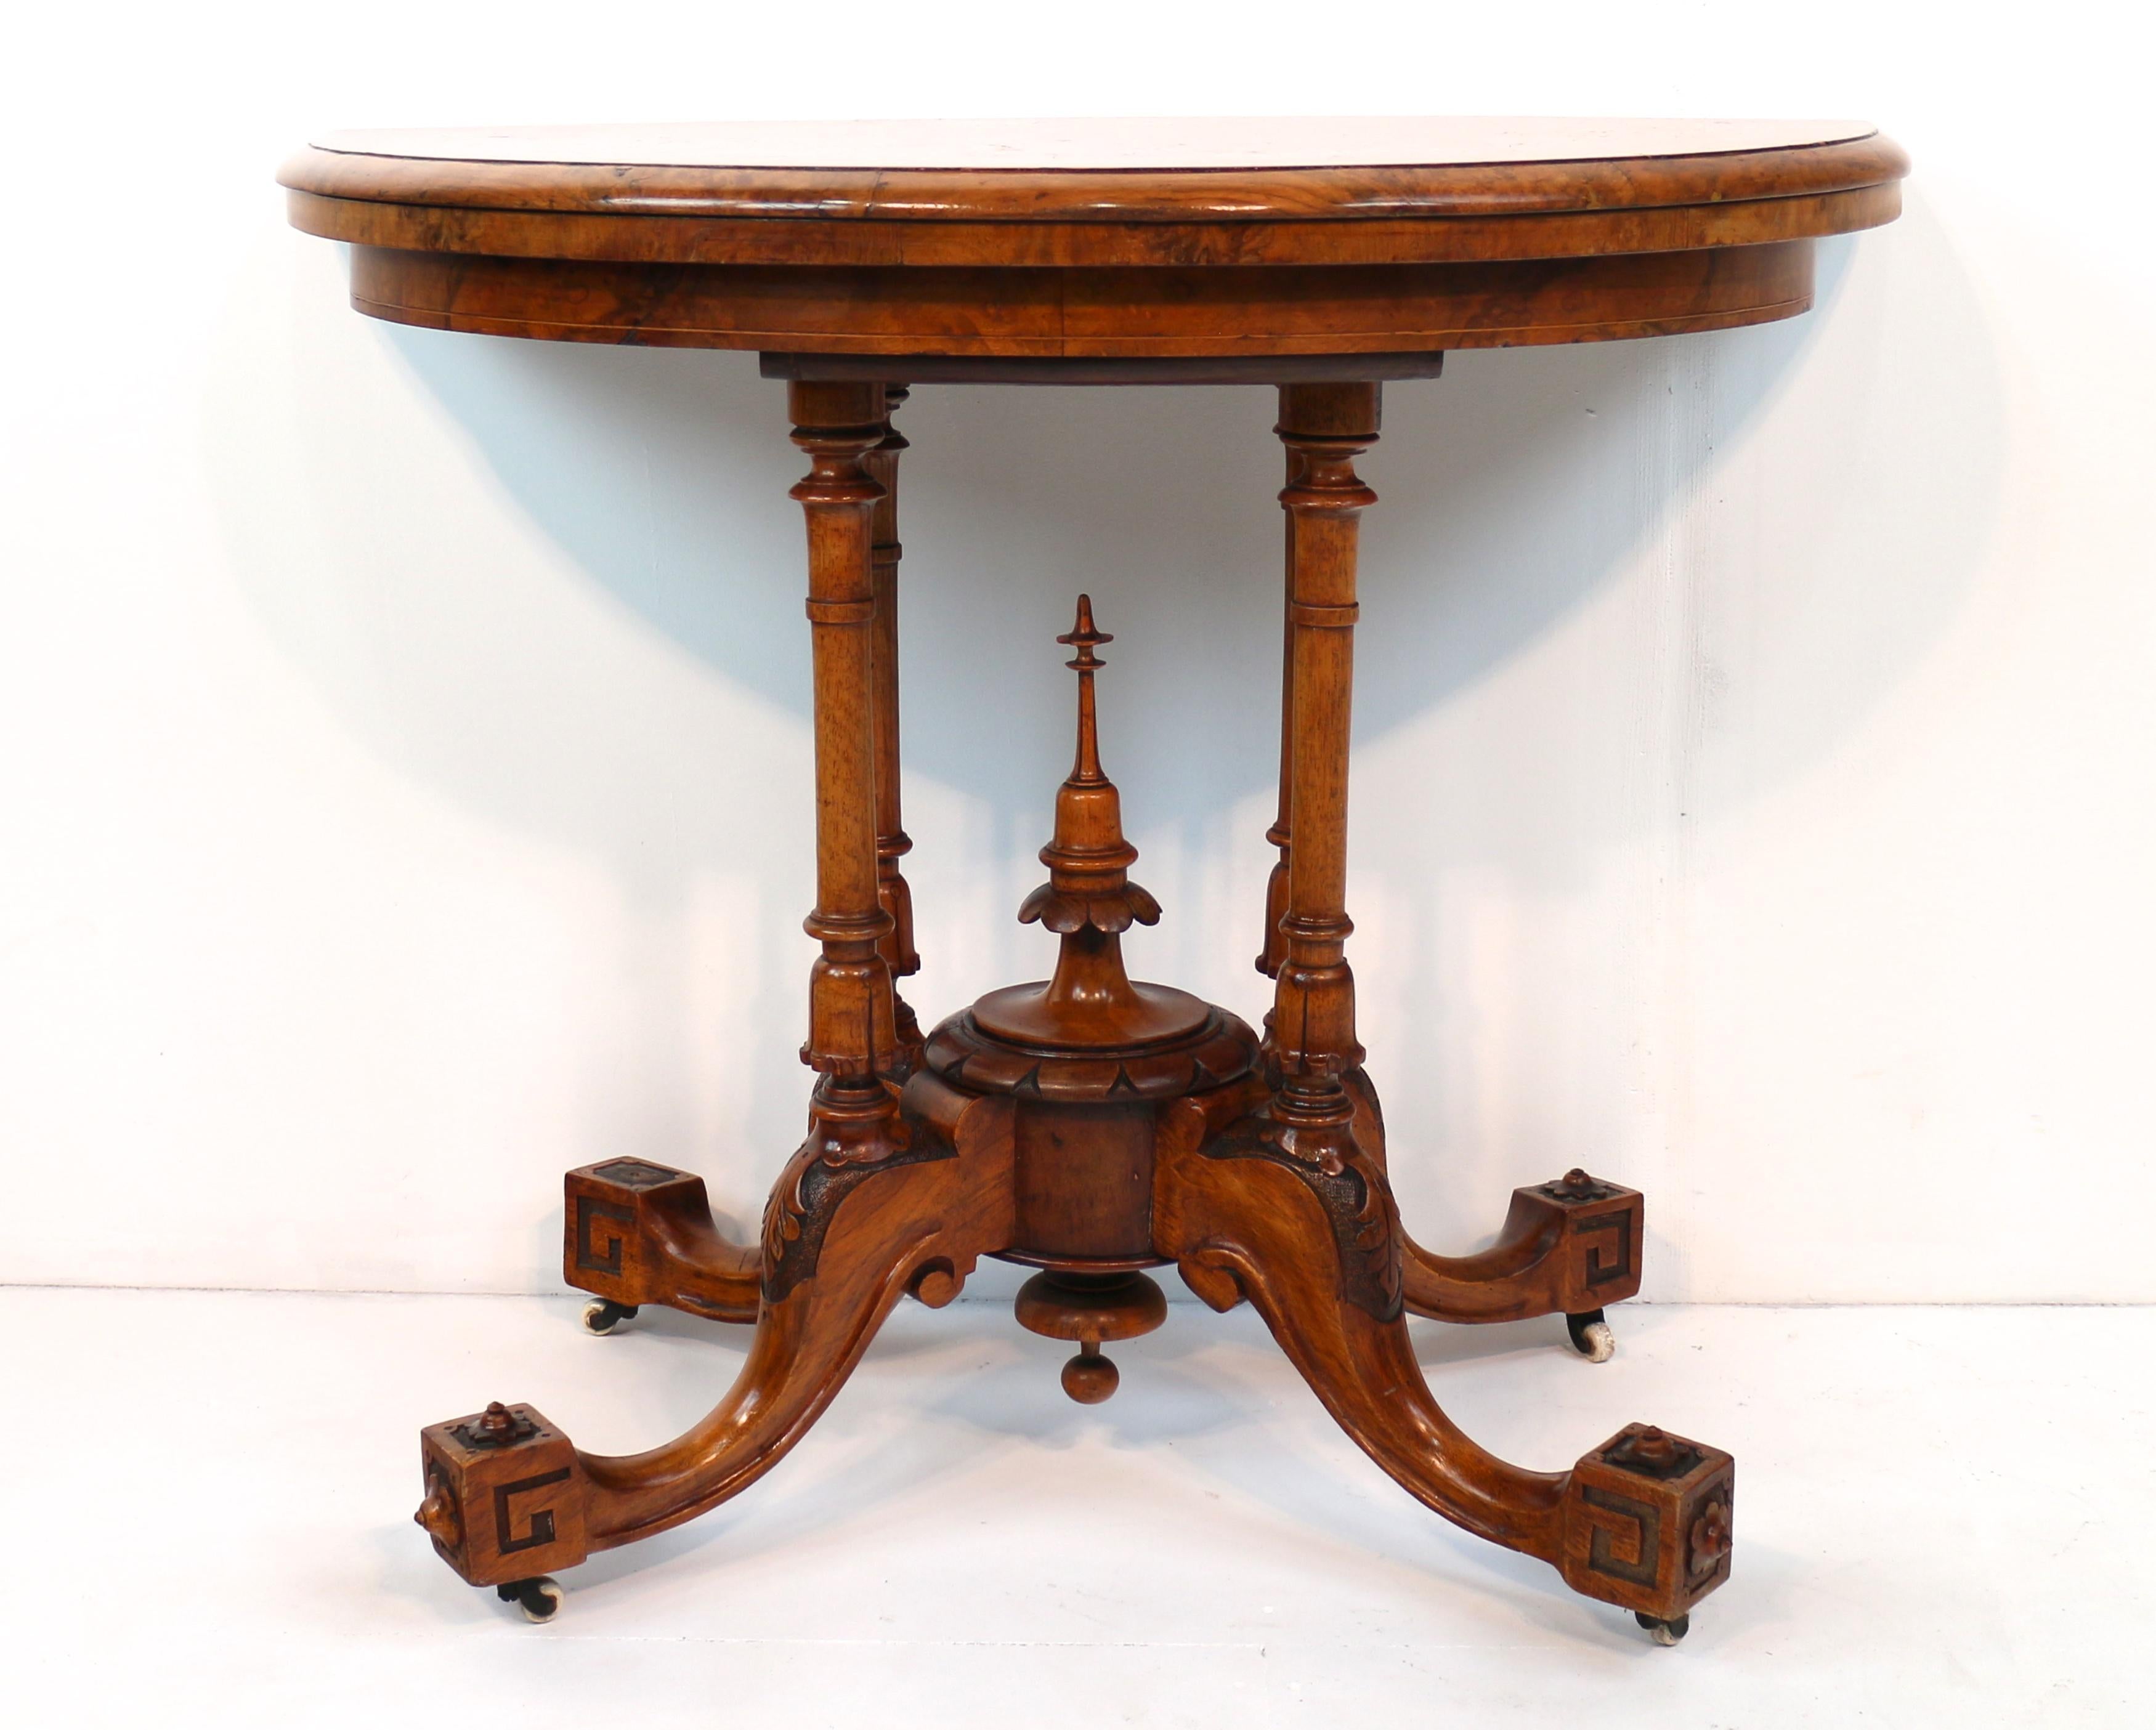 Antique English Victorian Burr Walnut & Floral Marquetry Demi-Lune Card Table For Sale 2